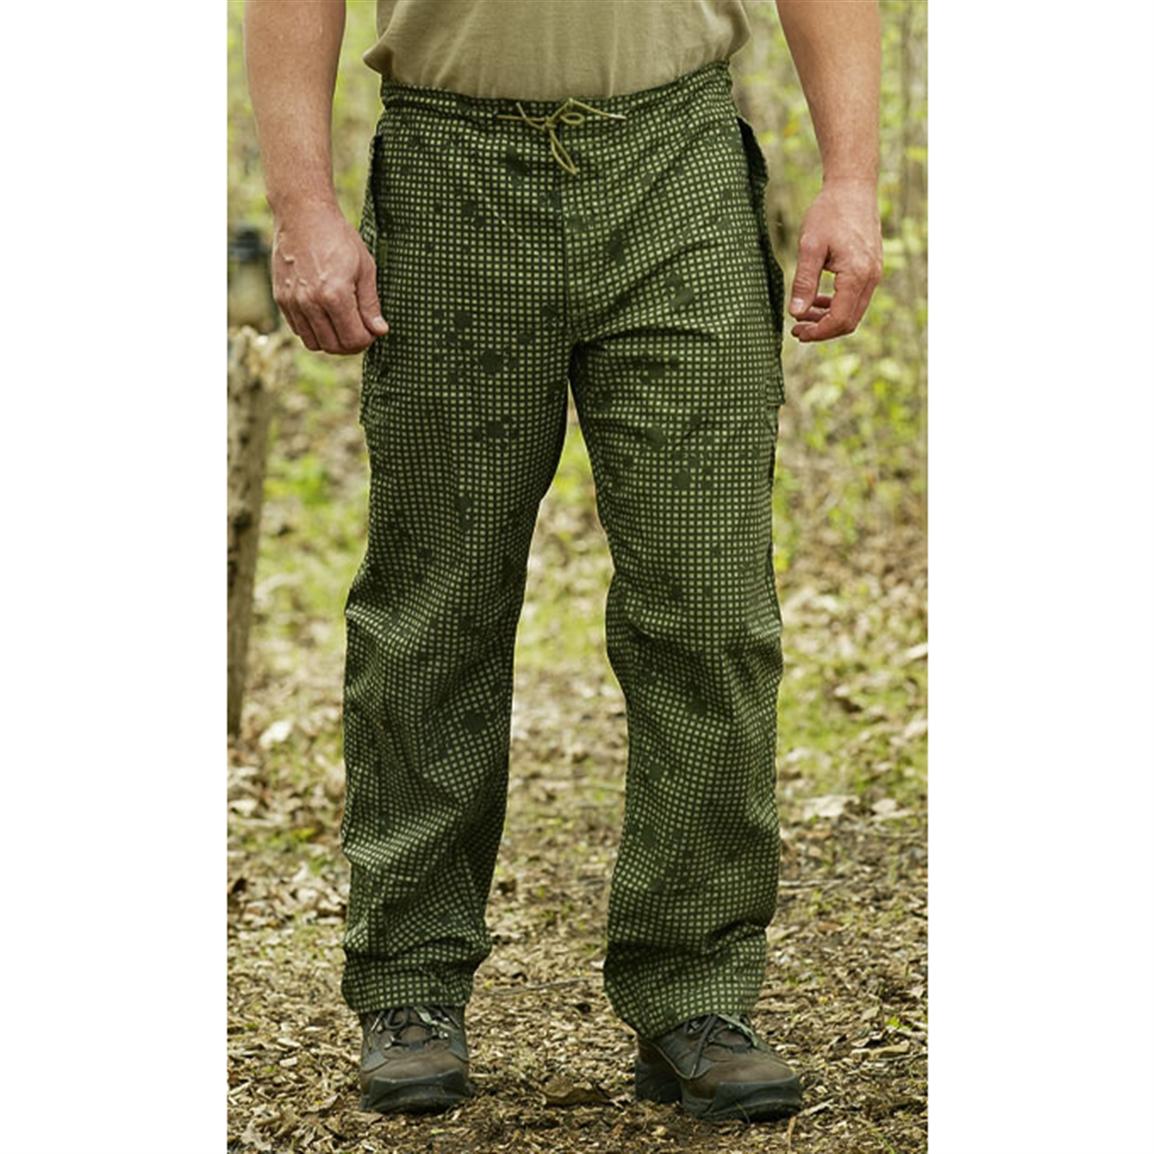 A-two Tactical - <Night Desert Camo BDU Pants Launched